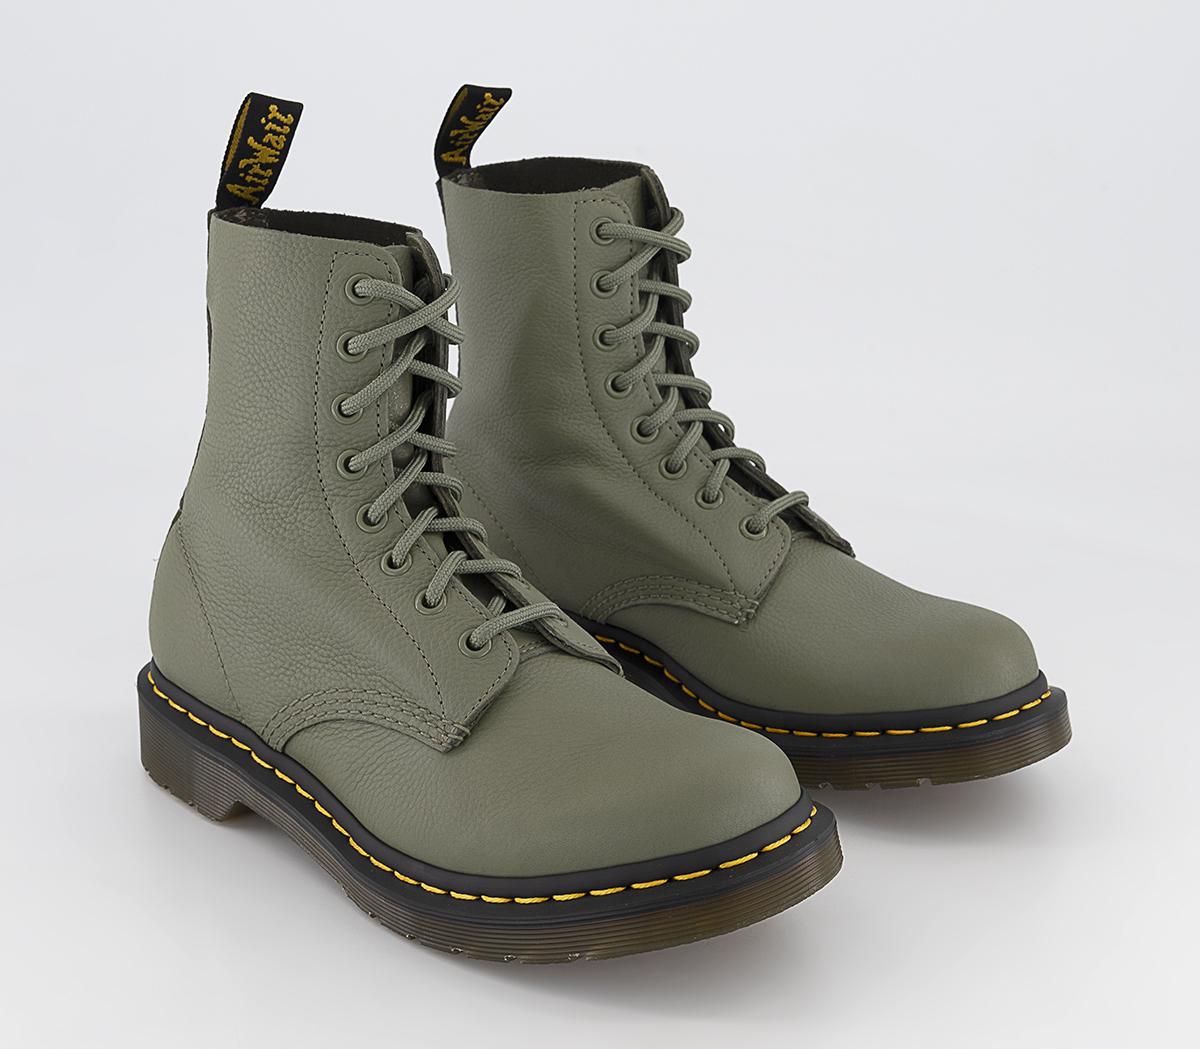 Dr. Martens 8 Eyelet Lace Up Boots Khaki Green Virginia - Women's Ankle ...